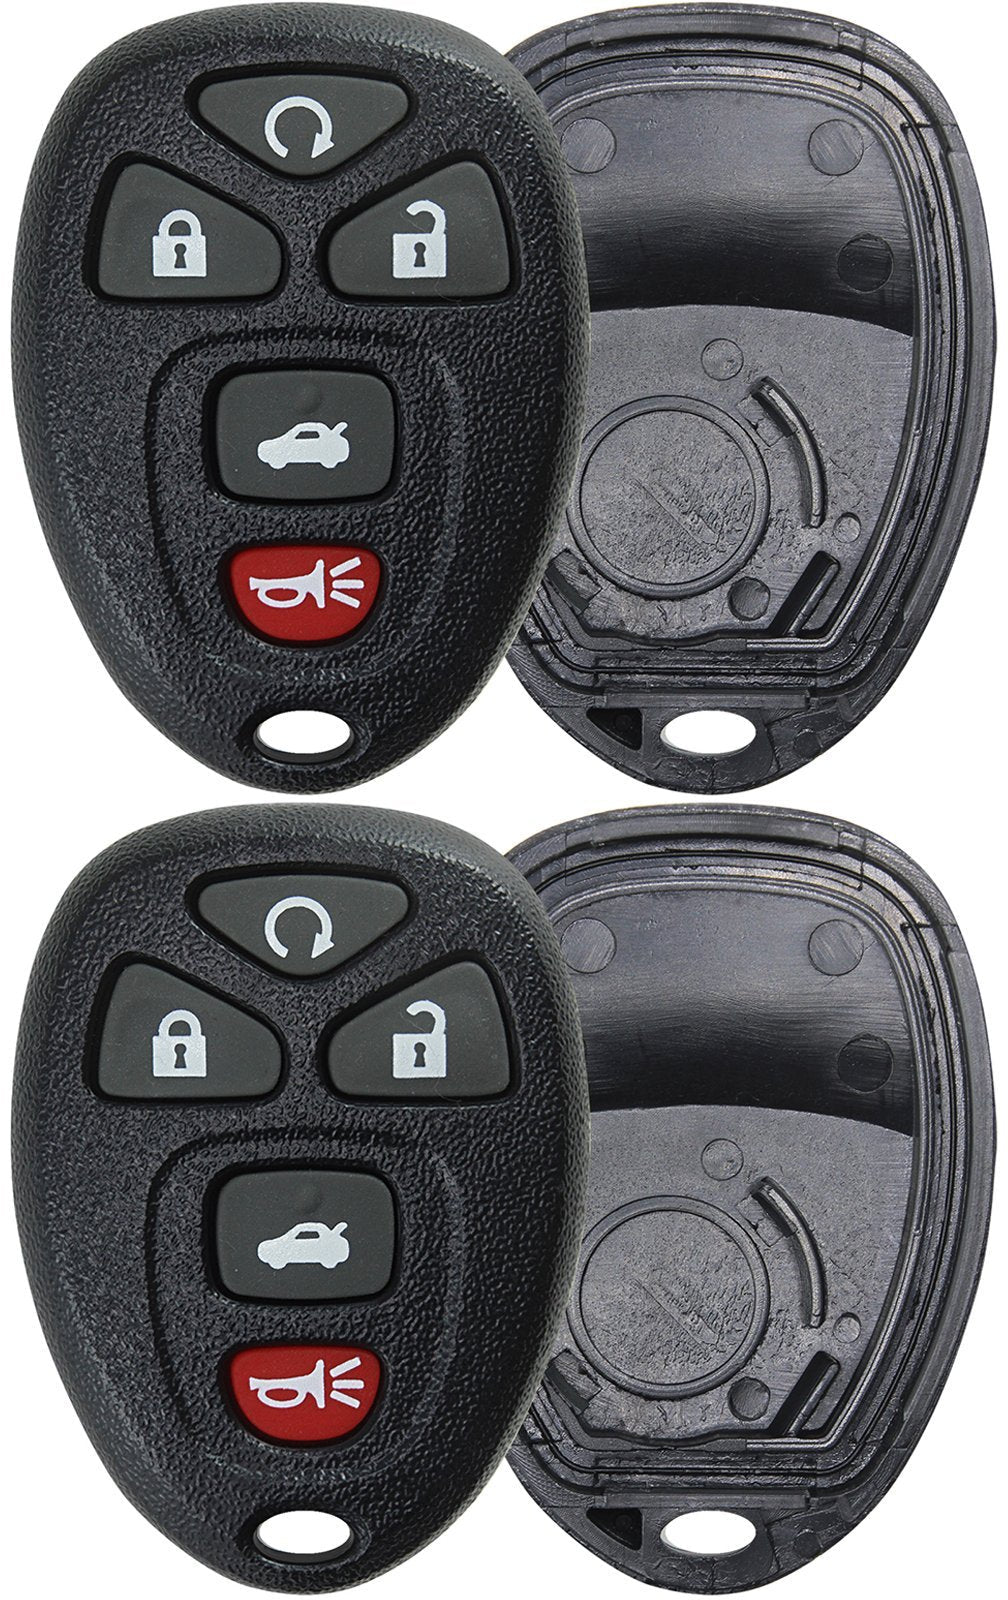  [AUSTRALIA] - KeylessOption Keyless Entry Remote Key Fob Shell Case Button Pad Cover for Chevy Impala Monte Carlo Buick Lucerne Cadillac DTS OUC60270, OUC60221 (Pack of 2) black